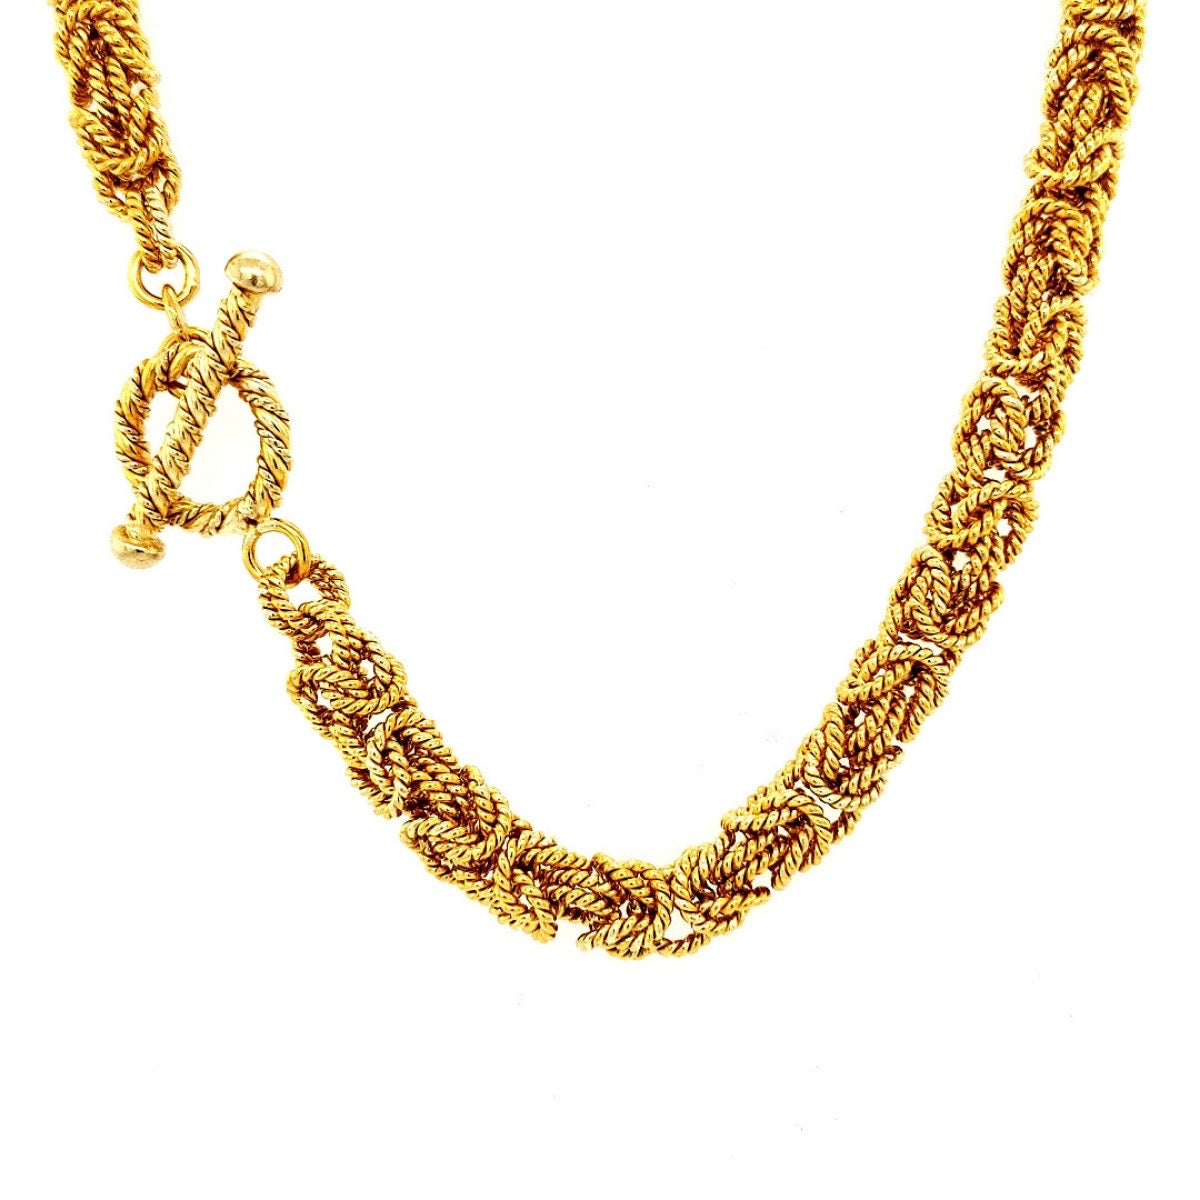 6mm 24K Vermeil Byzantine Necklace / main image on white background / Arpaia Lang